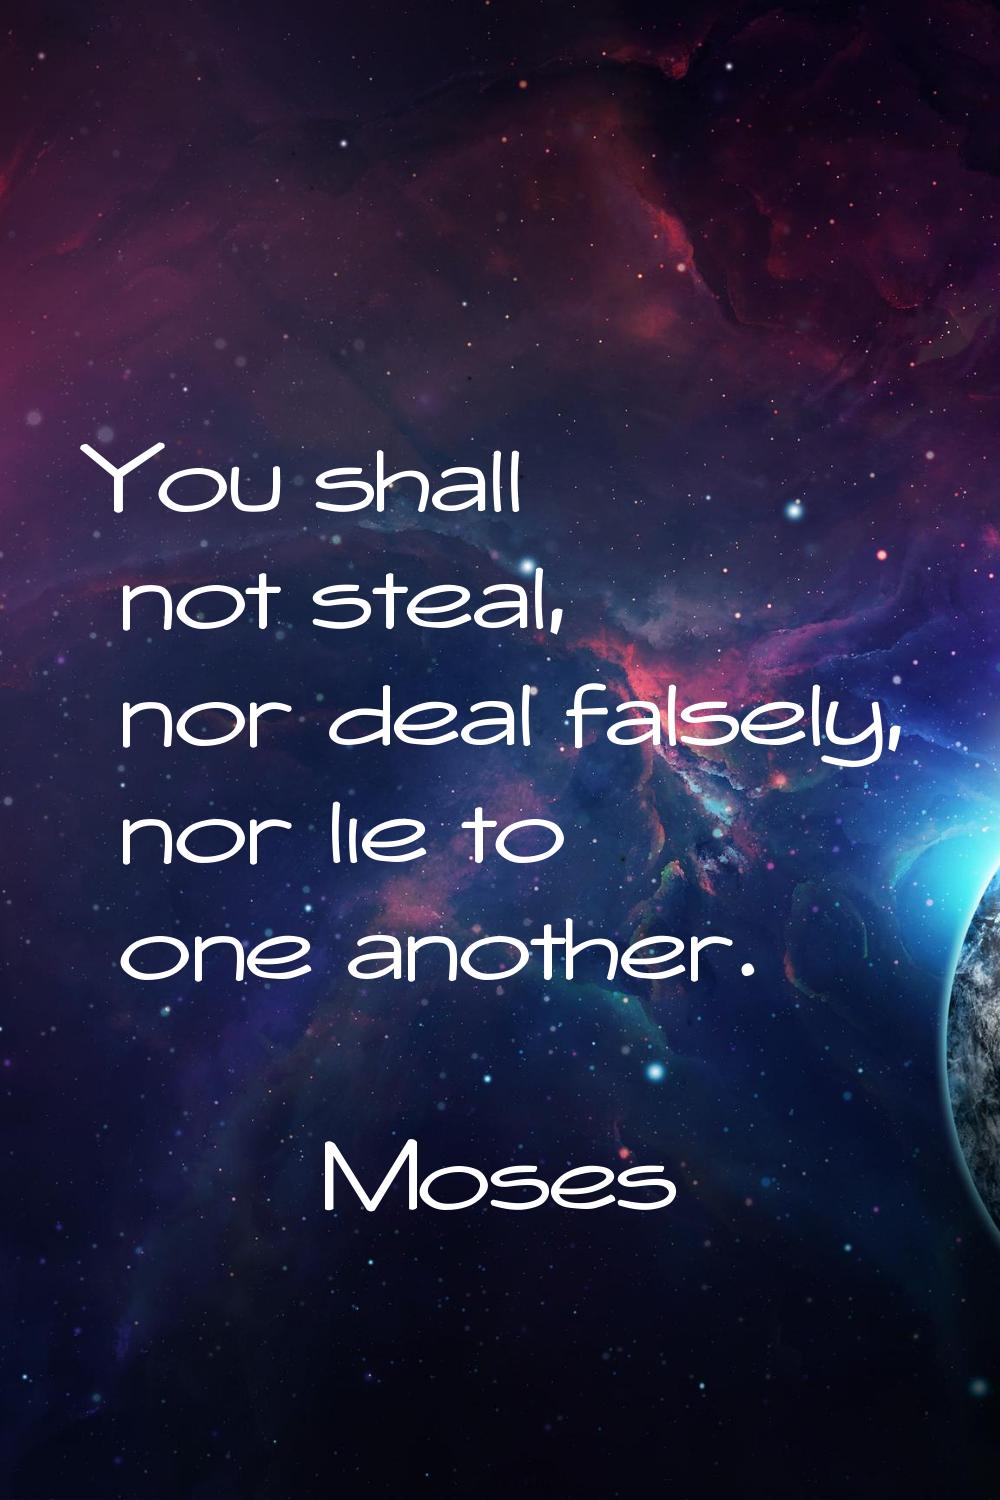 You shall not steal, nor deal falsely, nor lie to one another.